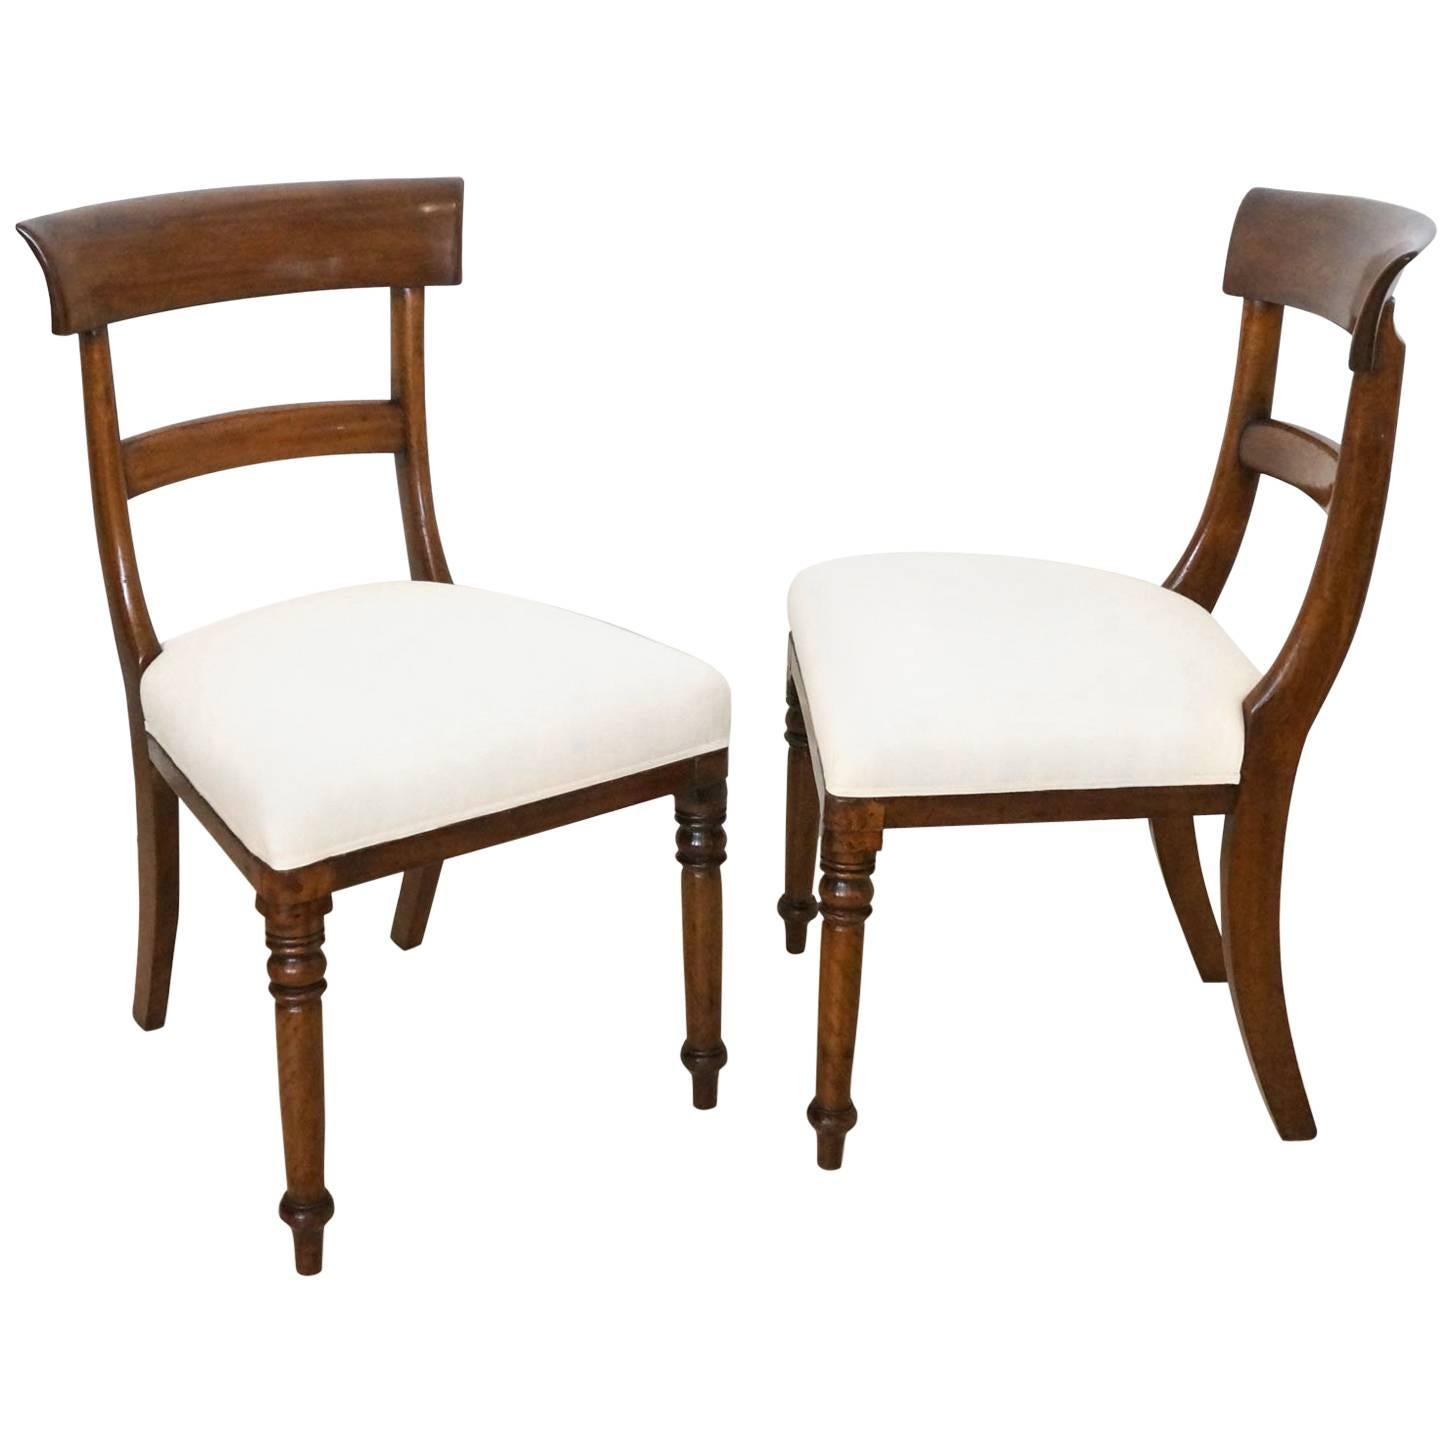 Pair of French Mahogany Side Chairs with Upholstered Seat Cushions, circa 1940s